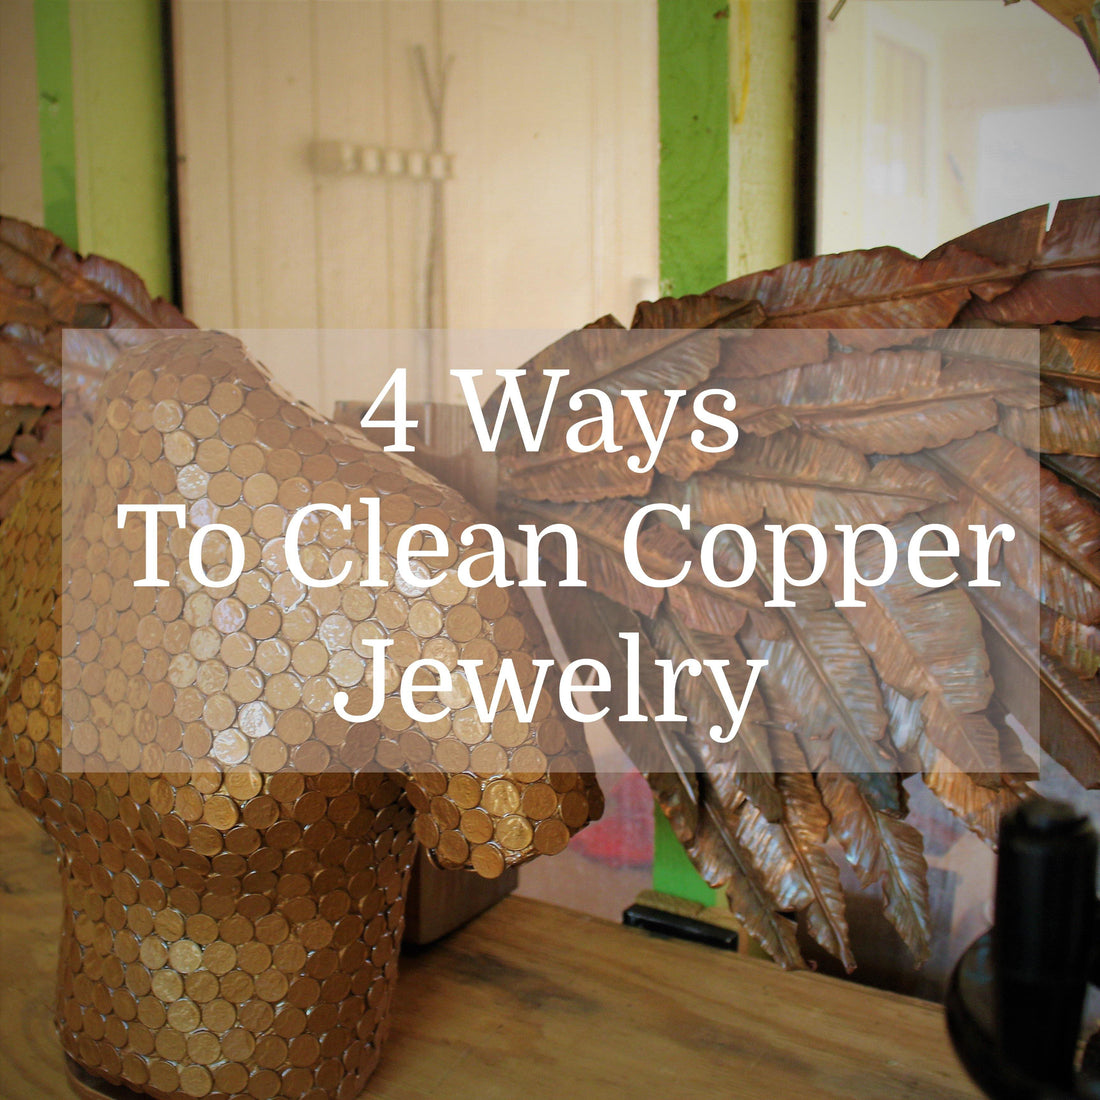 4 Ways To Clean Copper Jewelry At Home - LoraLeeArtist